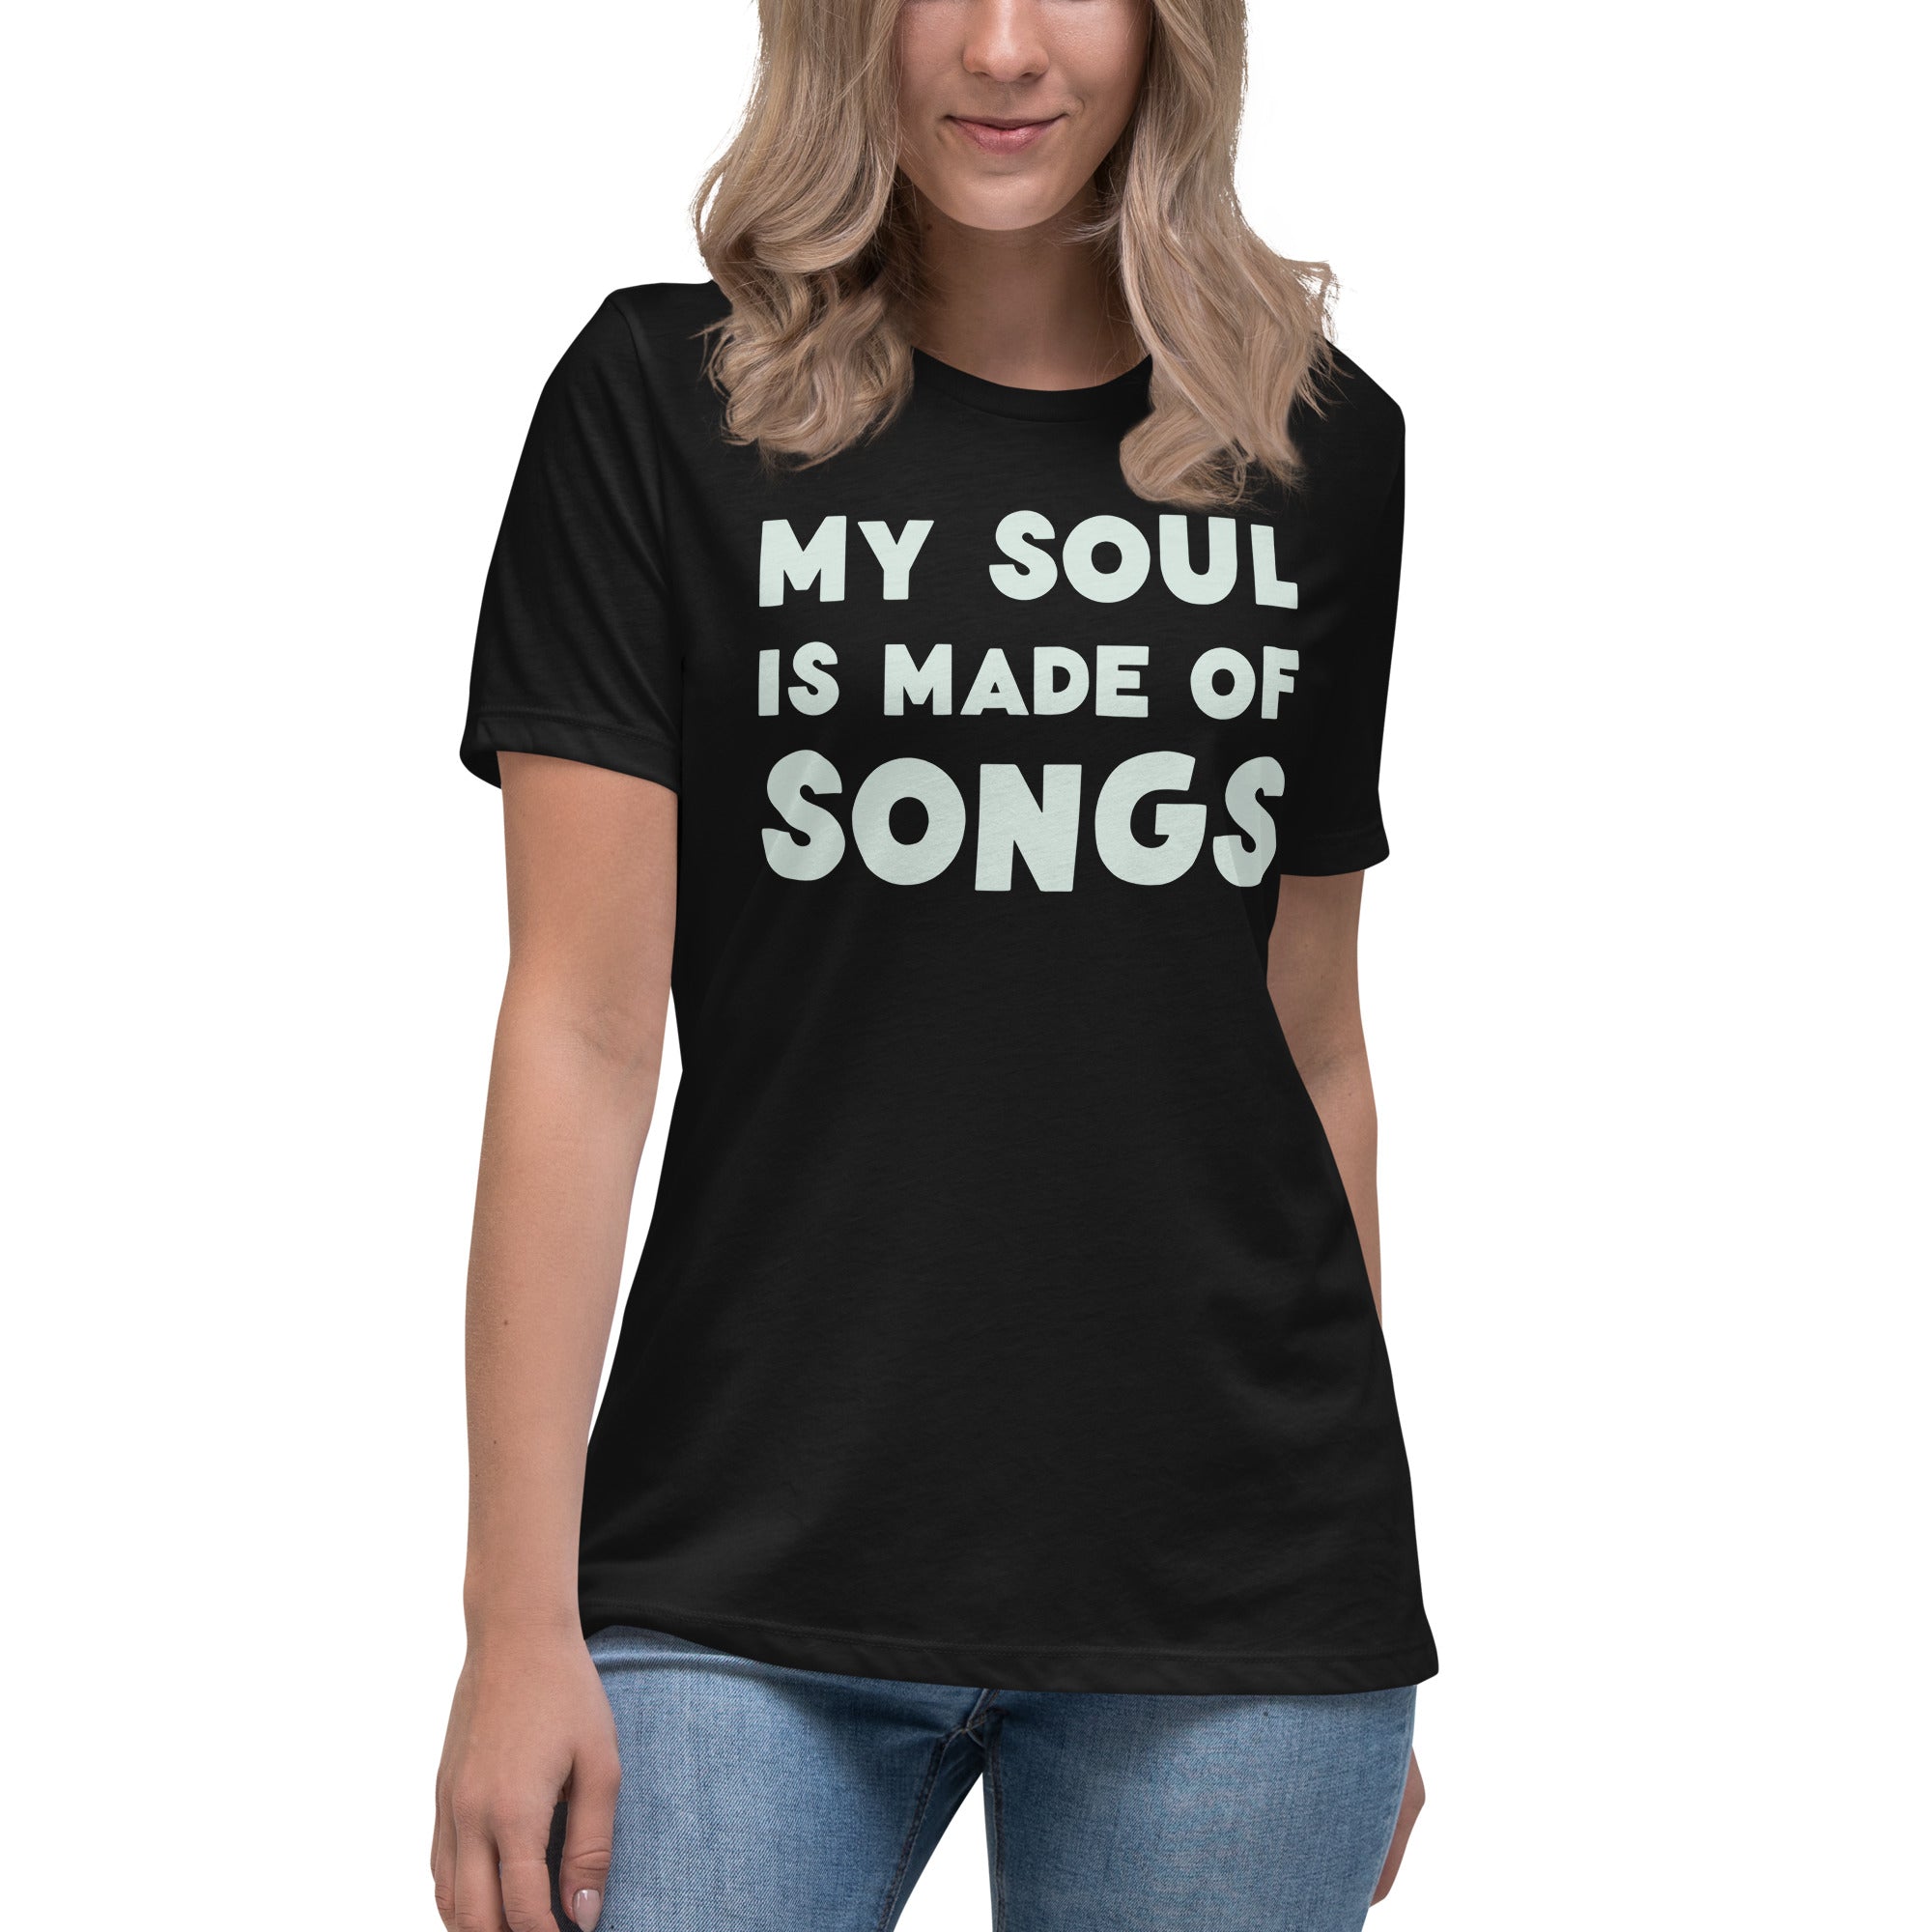 My Soul Is Made Of Songs (Words Only) - Women's Fit T-Shirt